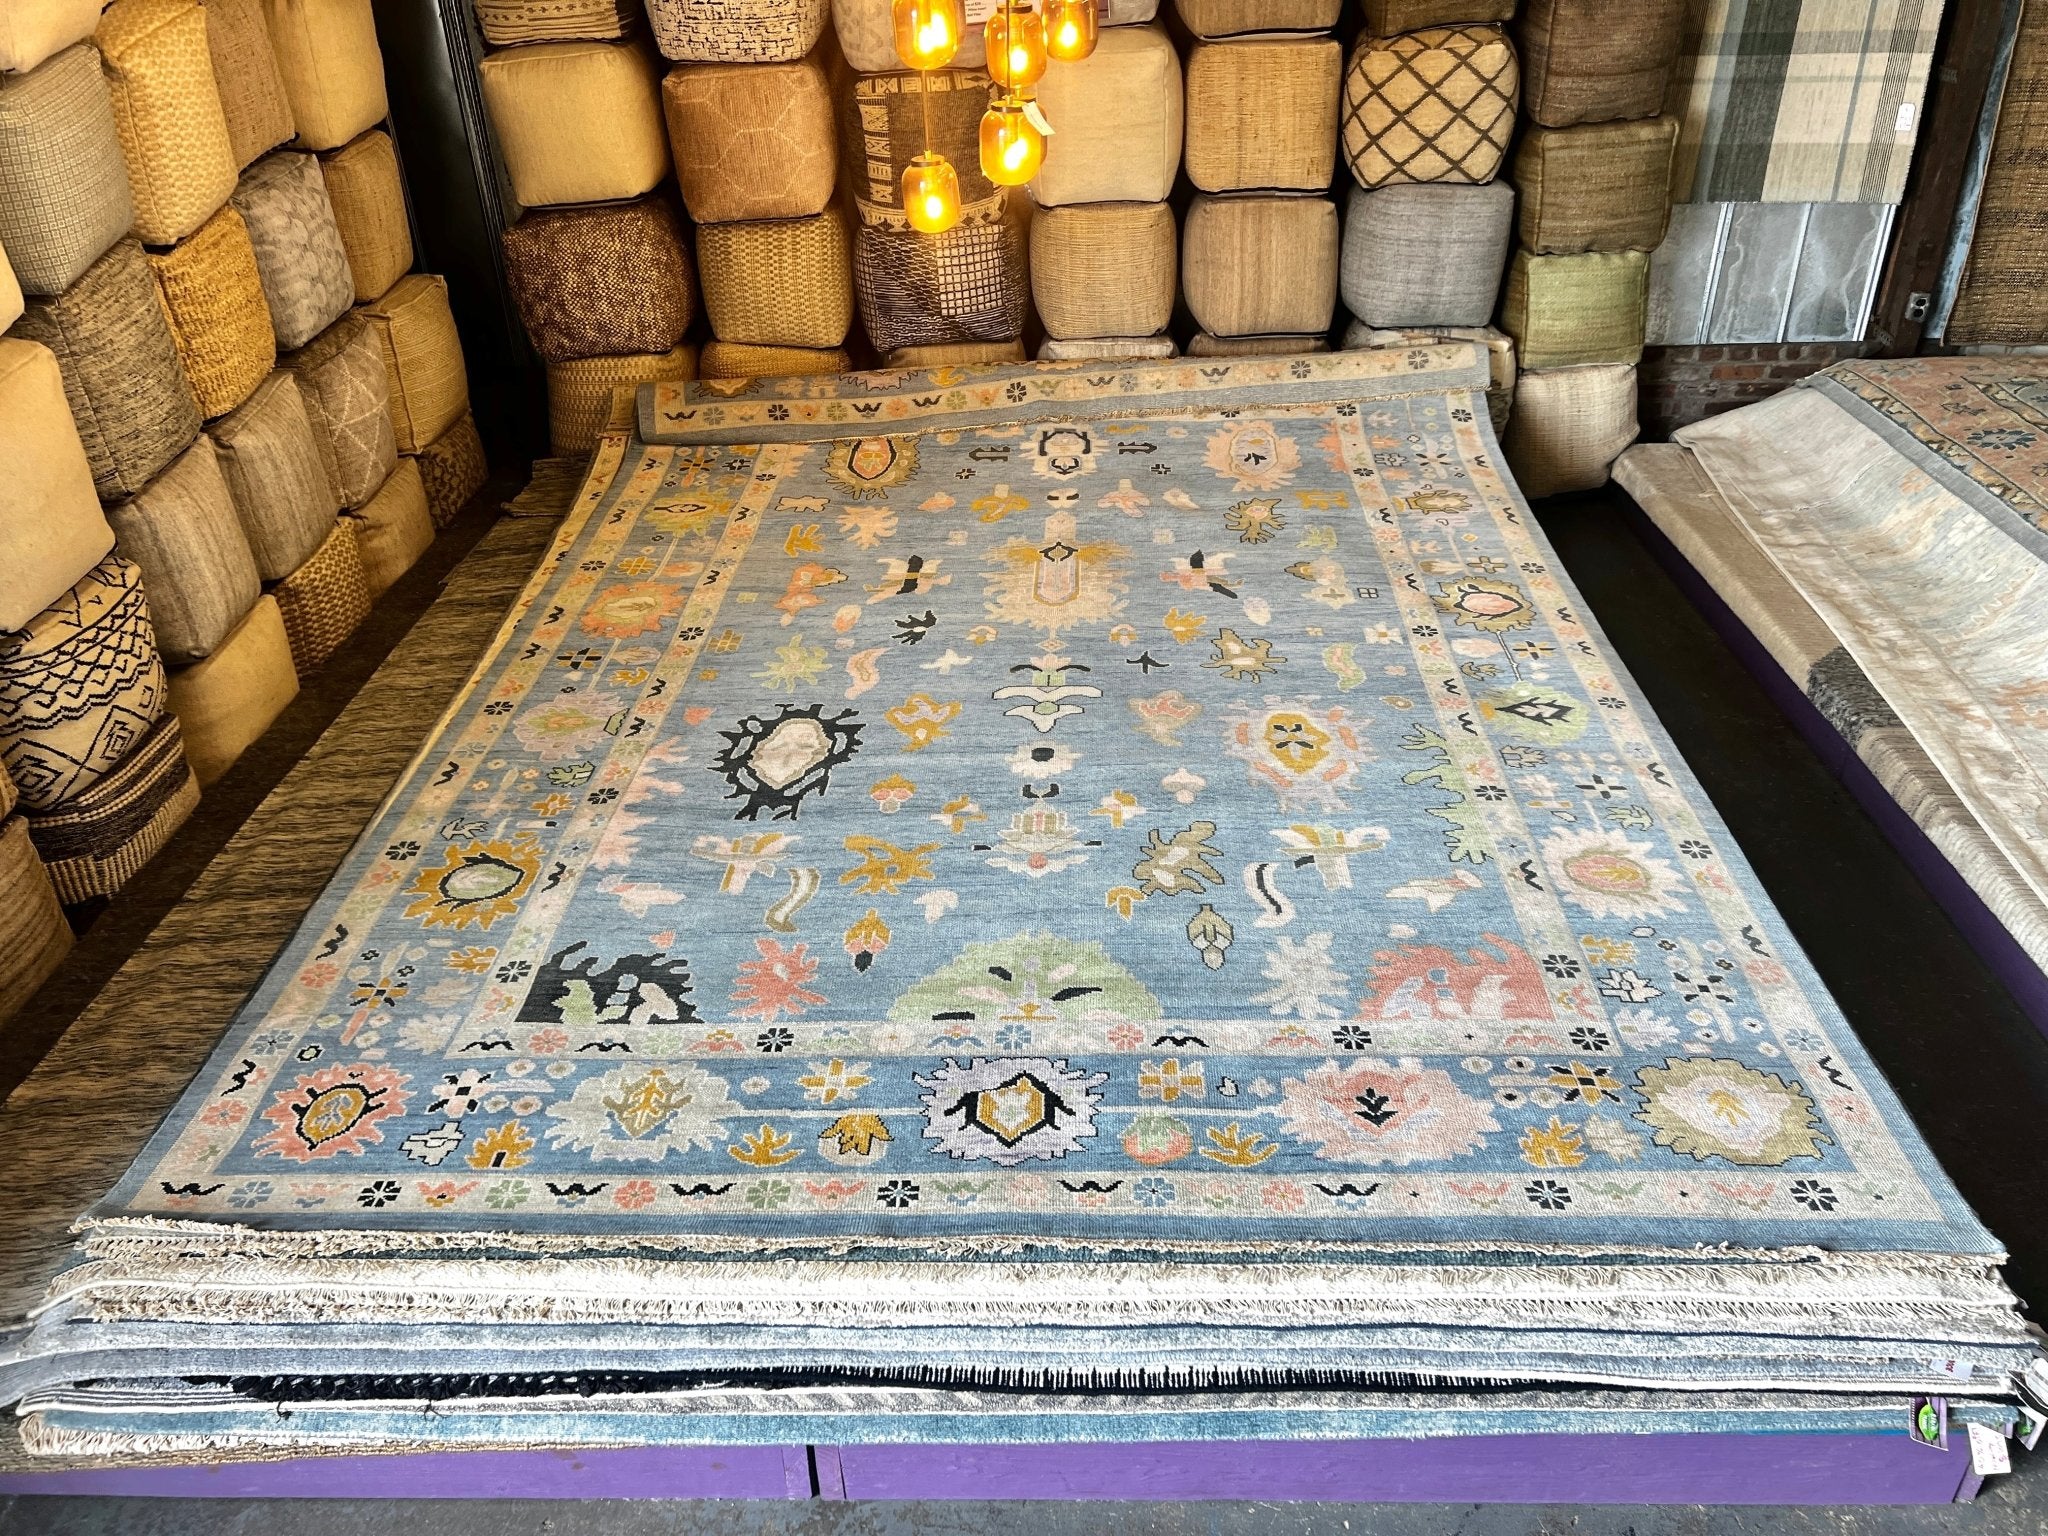 https://cdn.shopify.com/s/files/1/0257/9169/2836/products/hastings-10x14-blue-hand-knotted-oushak-rug-109405.jpg?v=1699806767